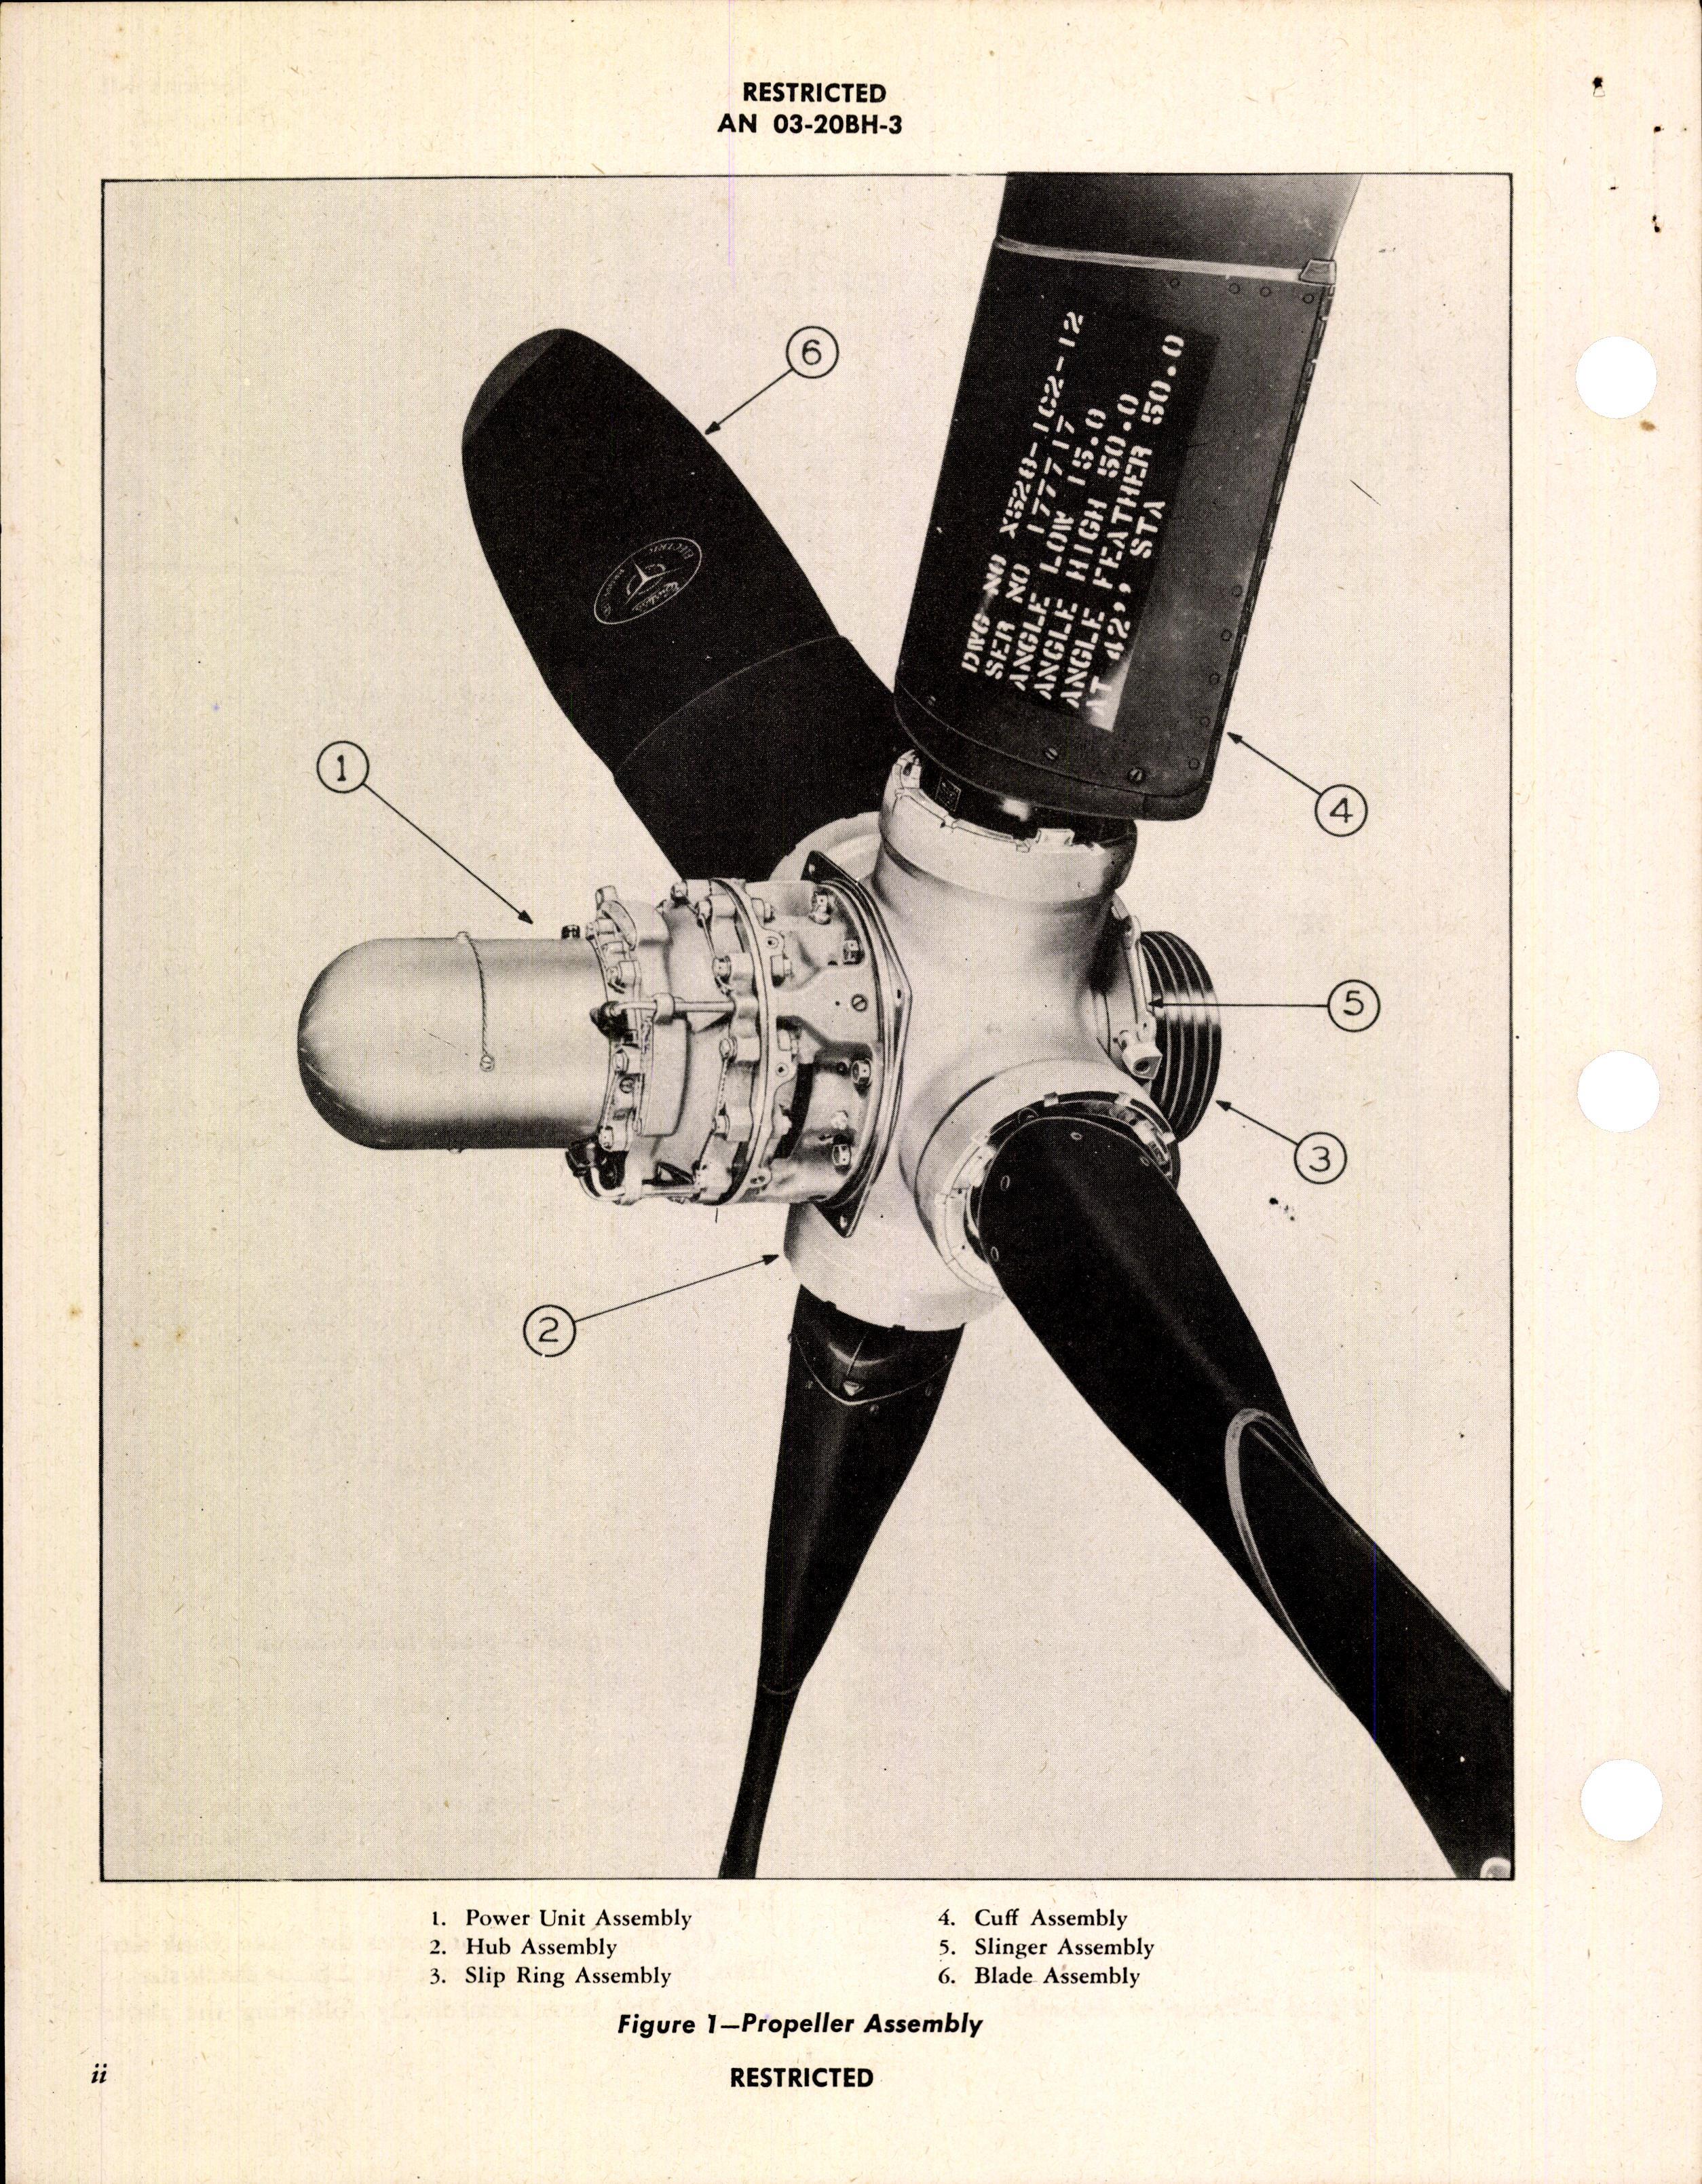 Sample page 10 from AirCorps Library document: Handbook of Instructions with Parts Catalog for Model C542S-B Electric Propellers- Hollow Steel